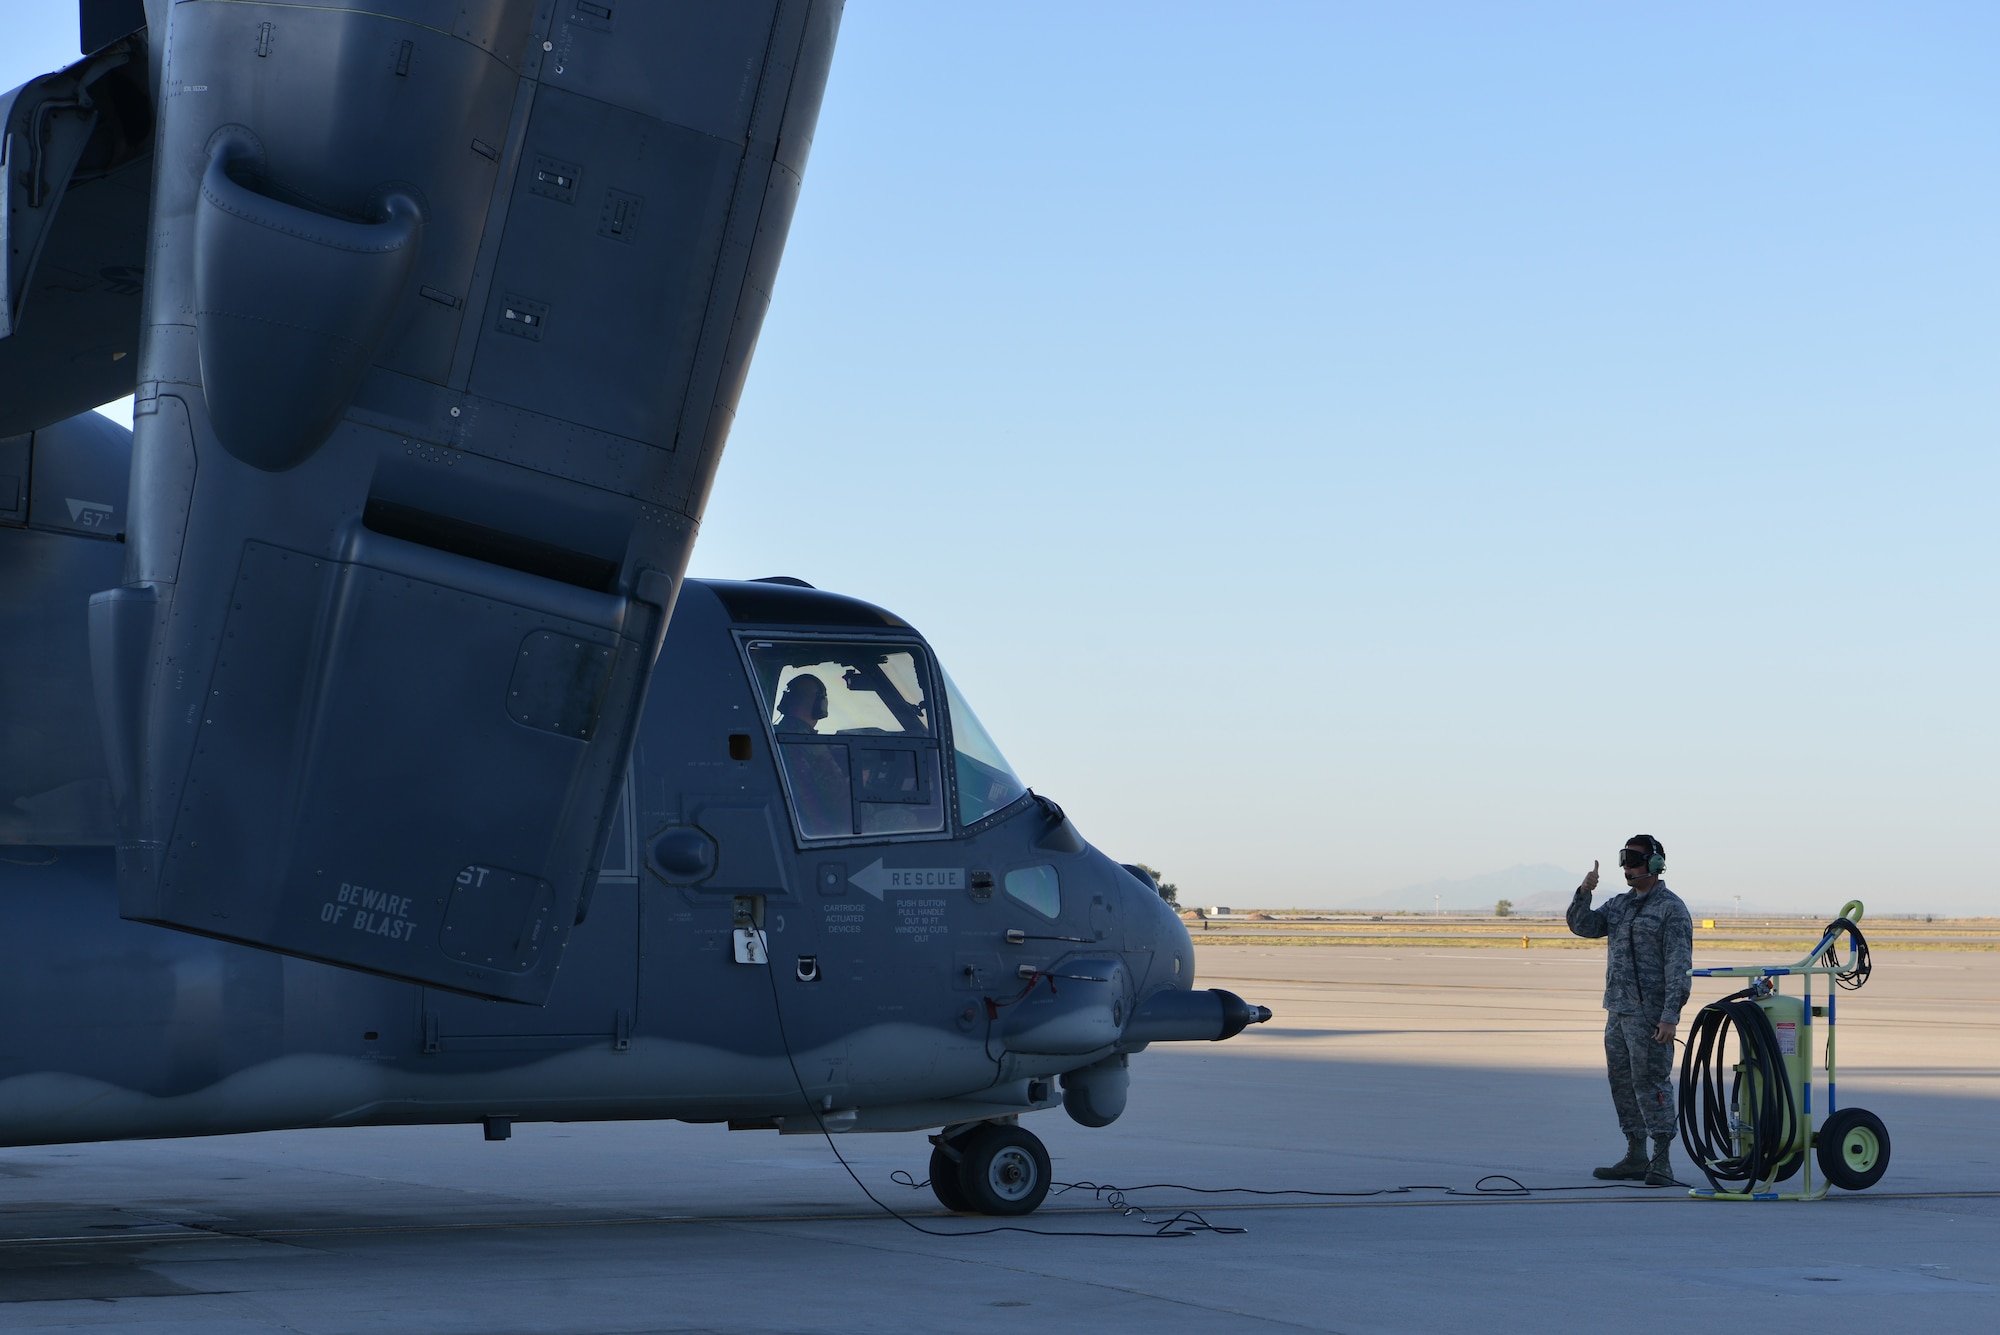 U.S. Air Force Airman 1st Class Ethan McCausland, 71st Aircraft Maintenance Unit CV-22 Osprey crew chief, gives the thumbs up during pre-flight checks at Kirtland Air Force Base, N.M., Oct. 7, 2019. The mission of the 71st AMU is to provide mission ready CV-22 Ospreys for the 71st Special Operations Squadron. (U.S. Air Force photo by Staff Sgt. Dylan Nuckolls)